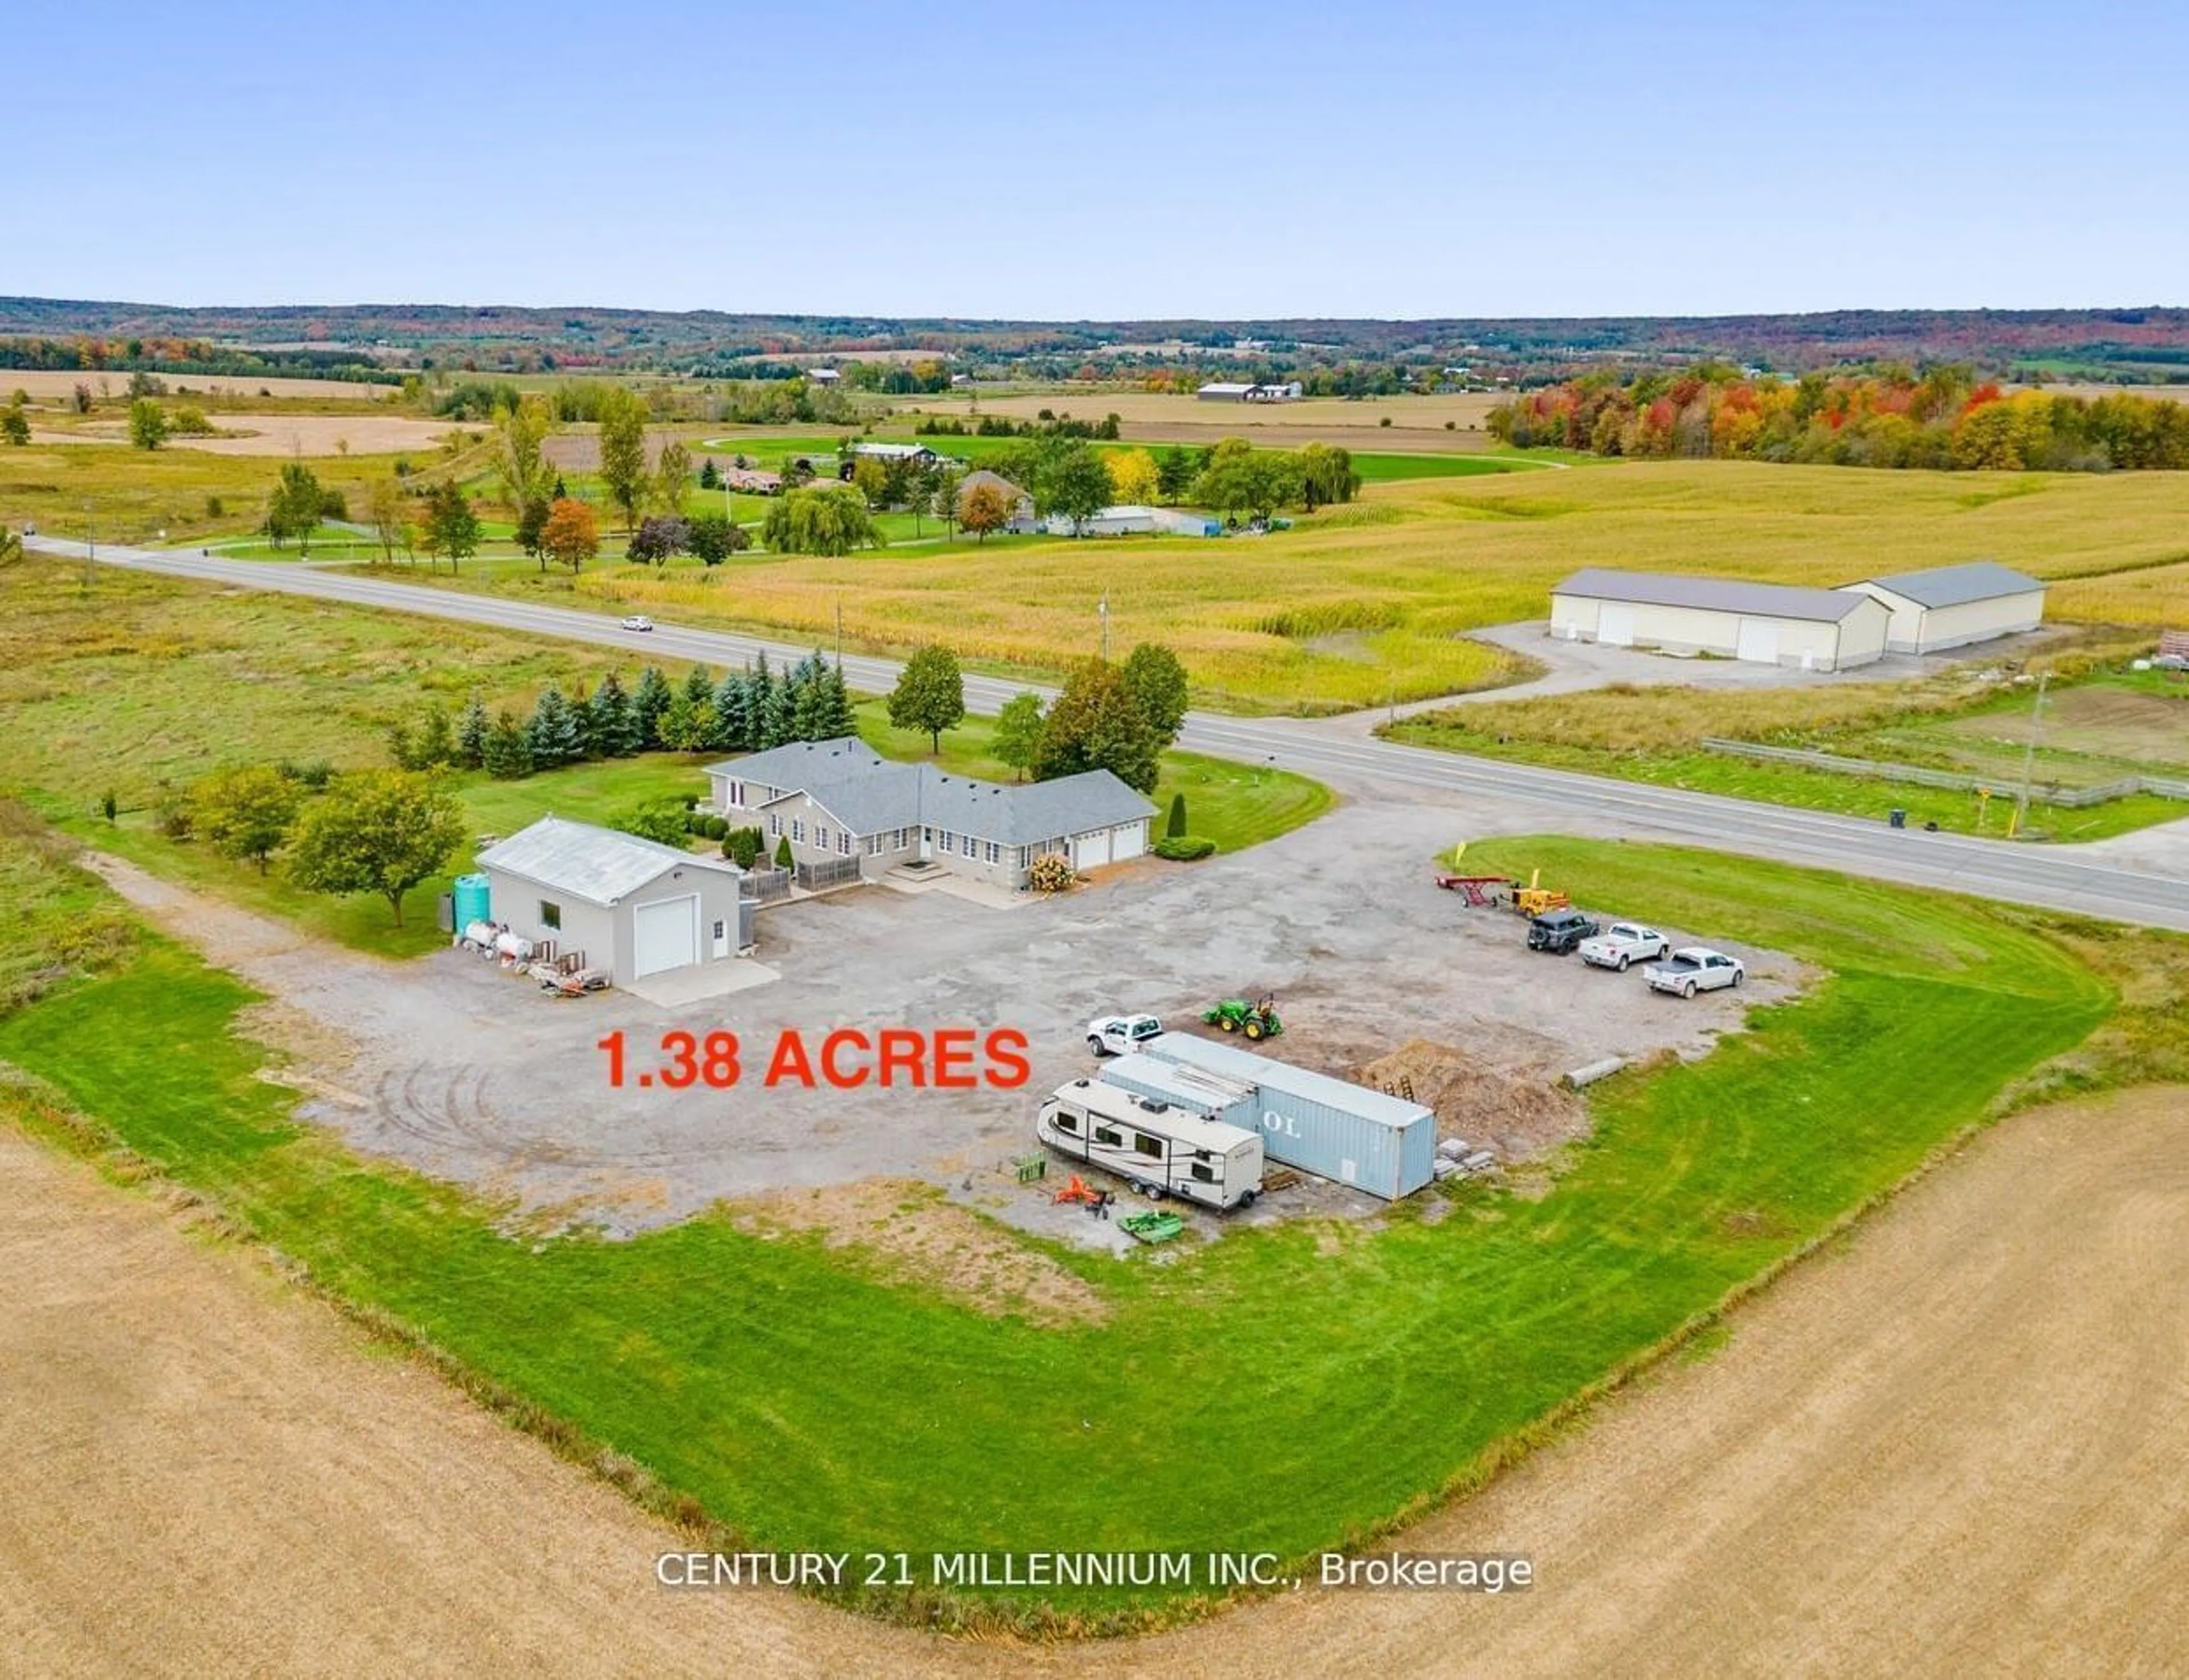 Fenced yard for 2319 King St, Caledon Ontario L7C 0S7